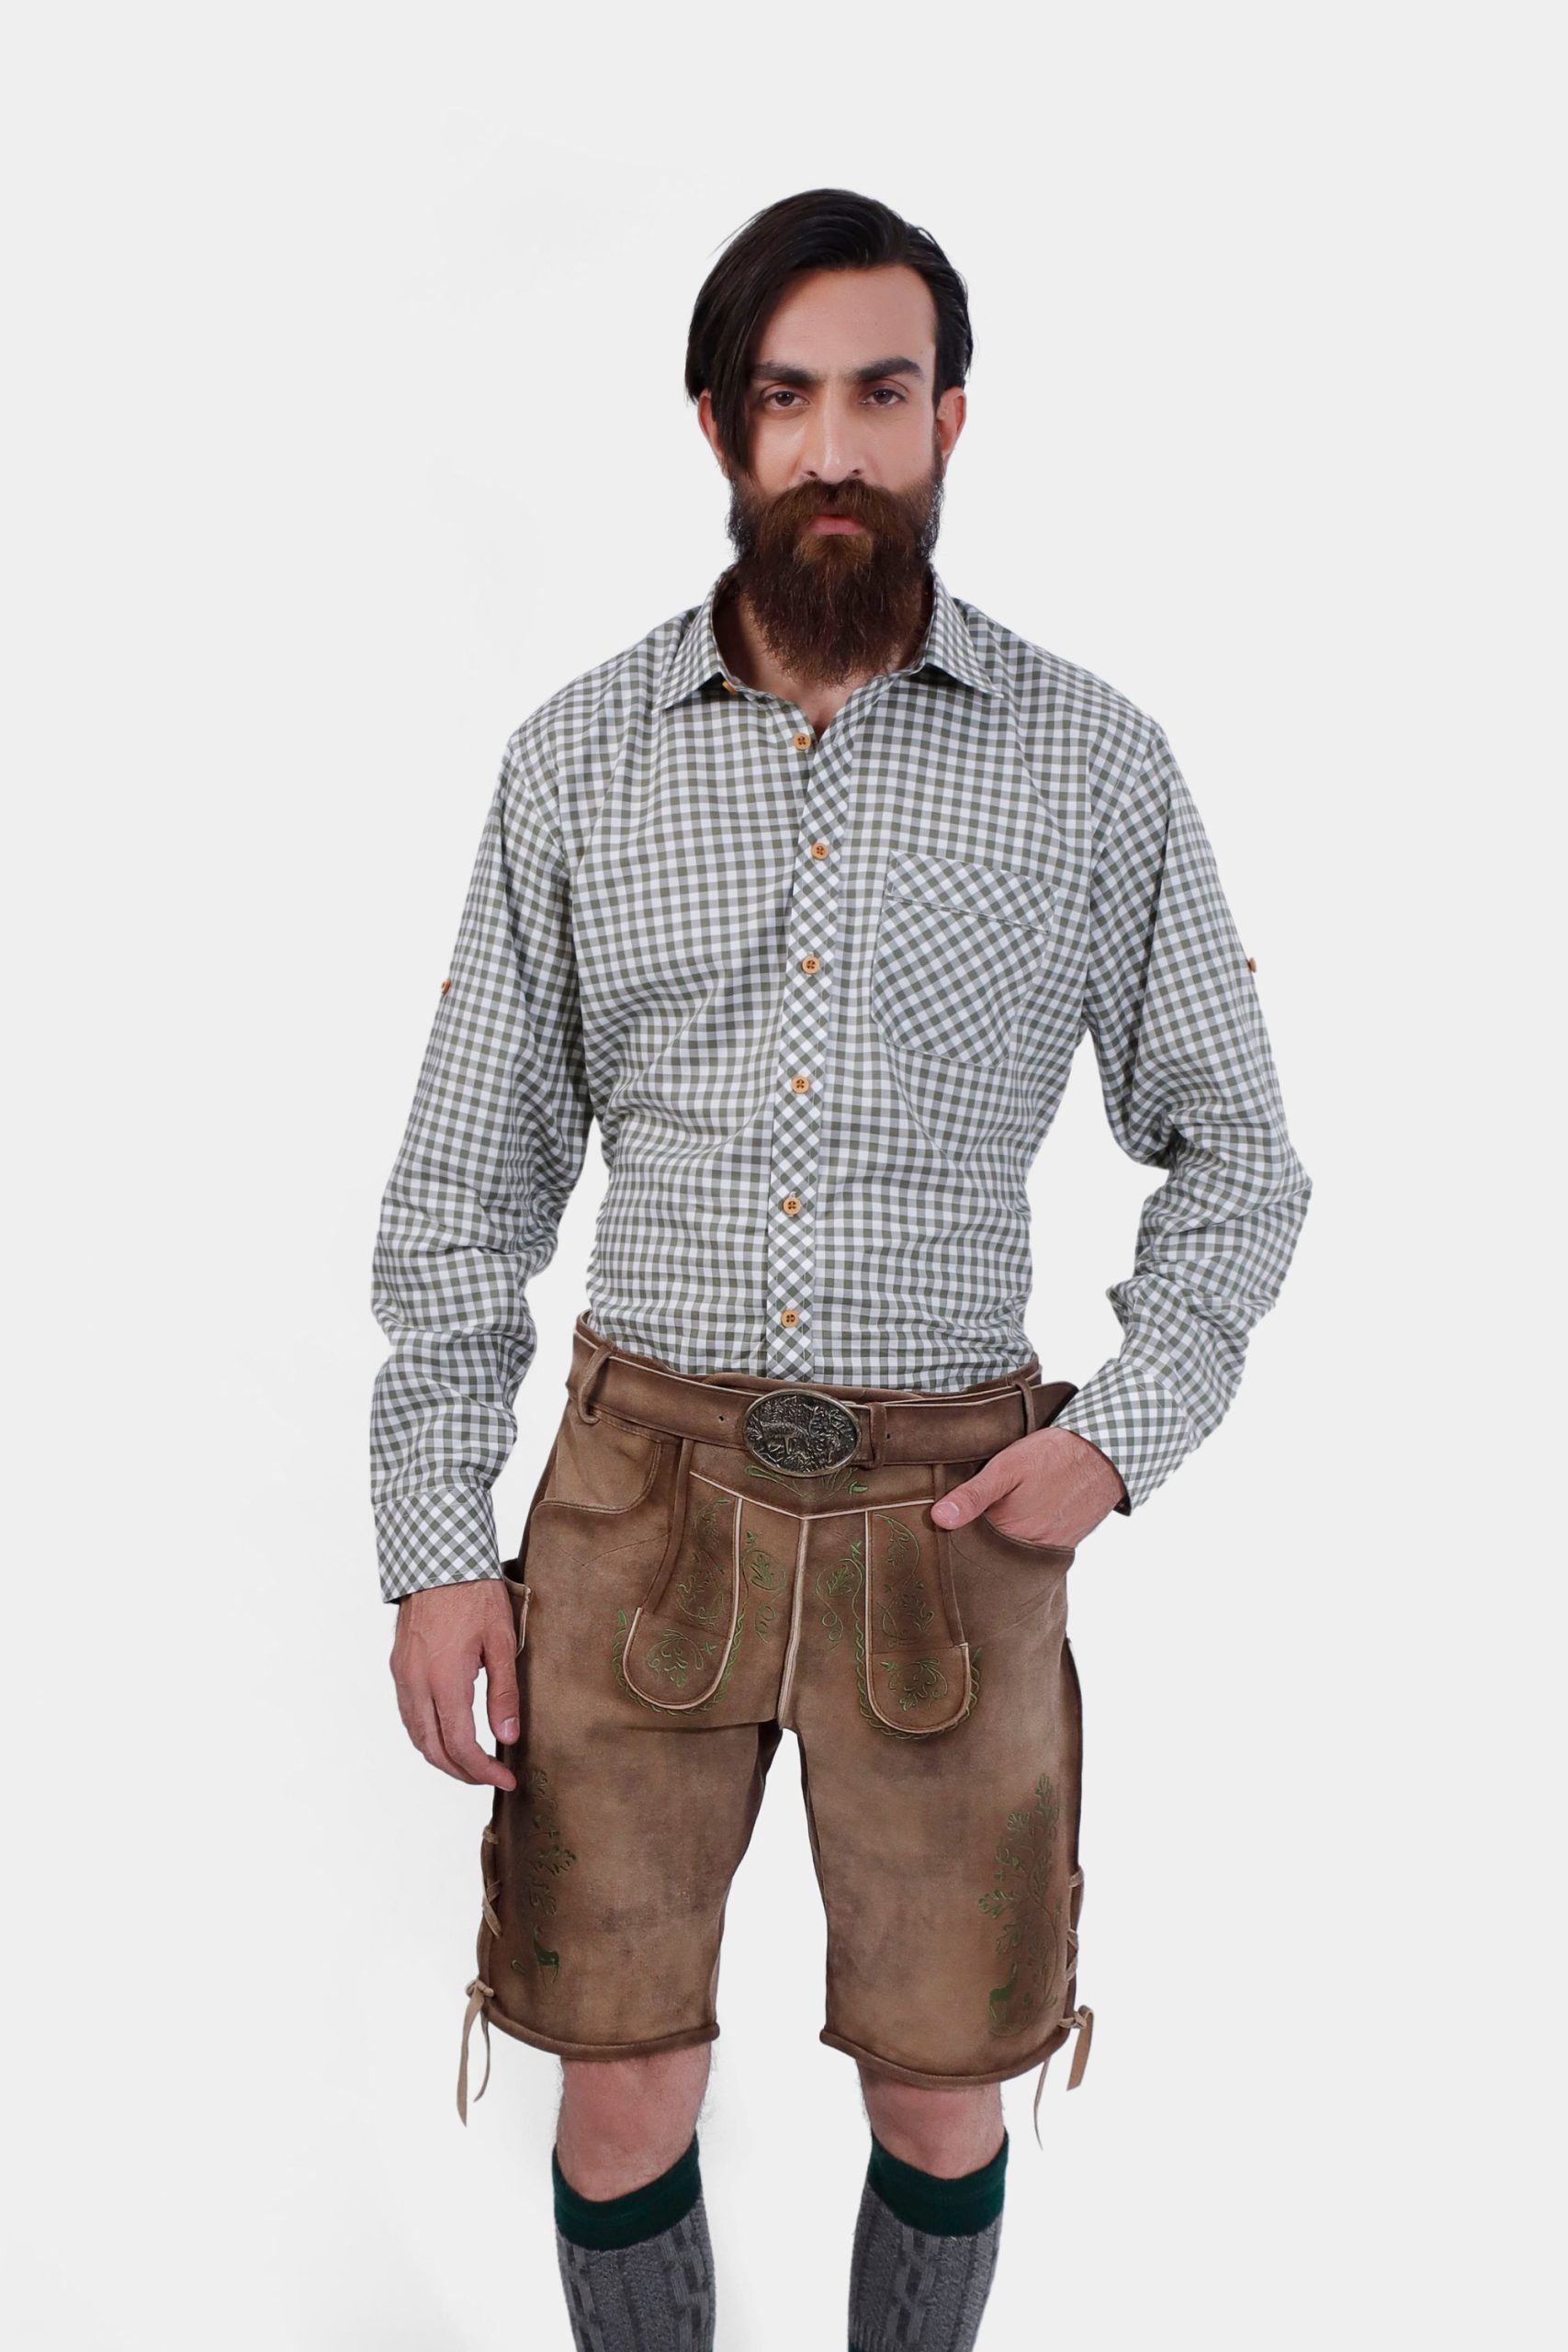 Man wearing Thuringian Forest Dragons Lederhosen with a checkered shirt, posing with hands in pockets